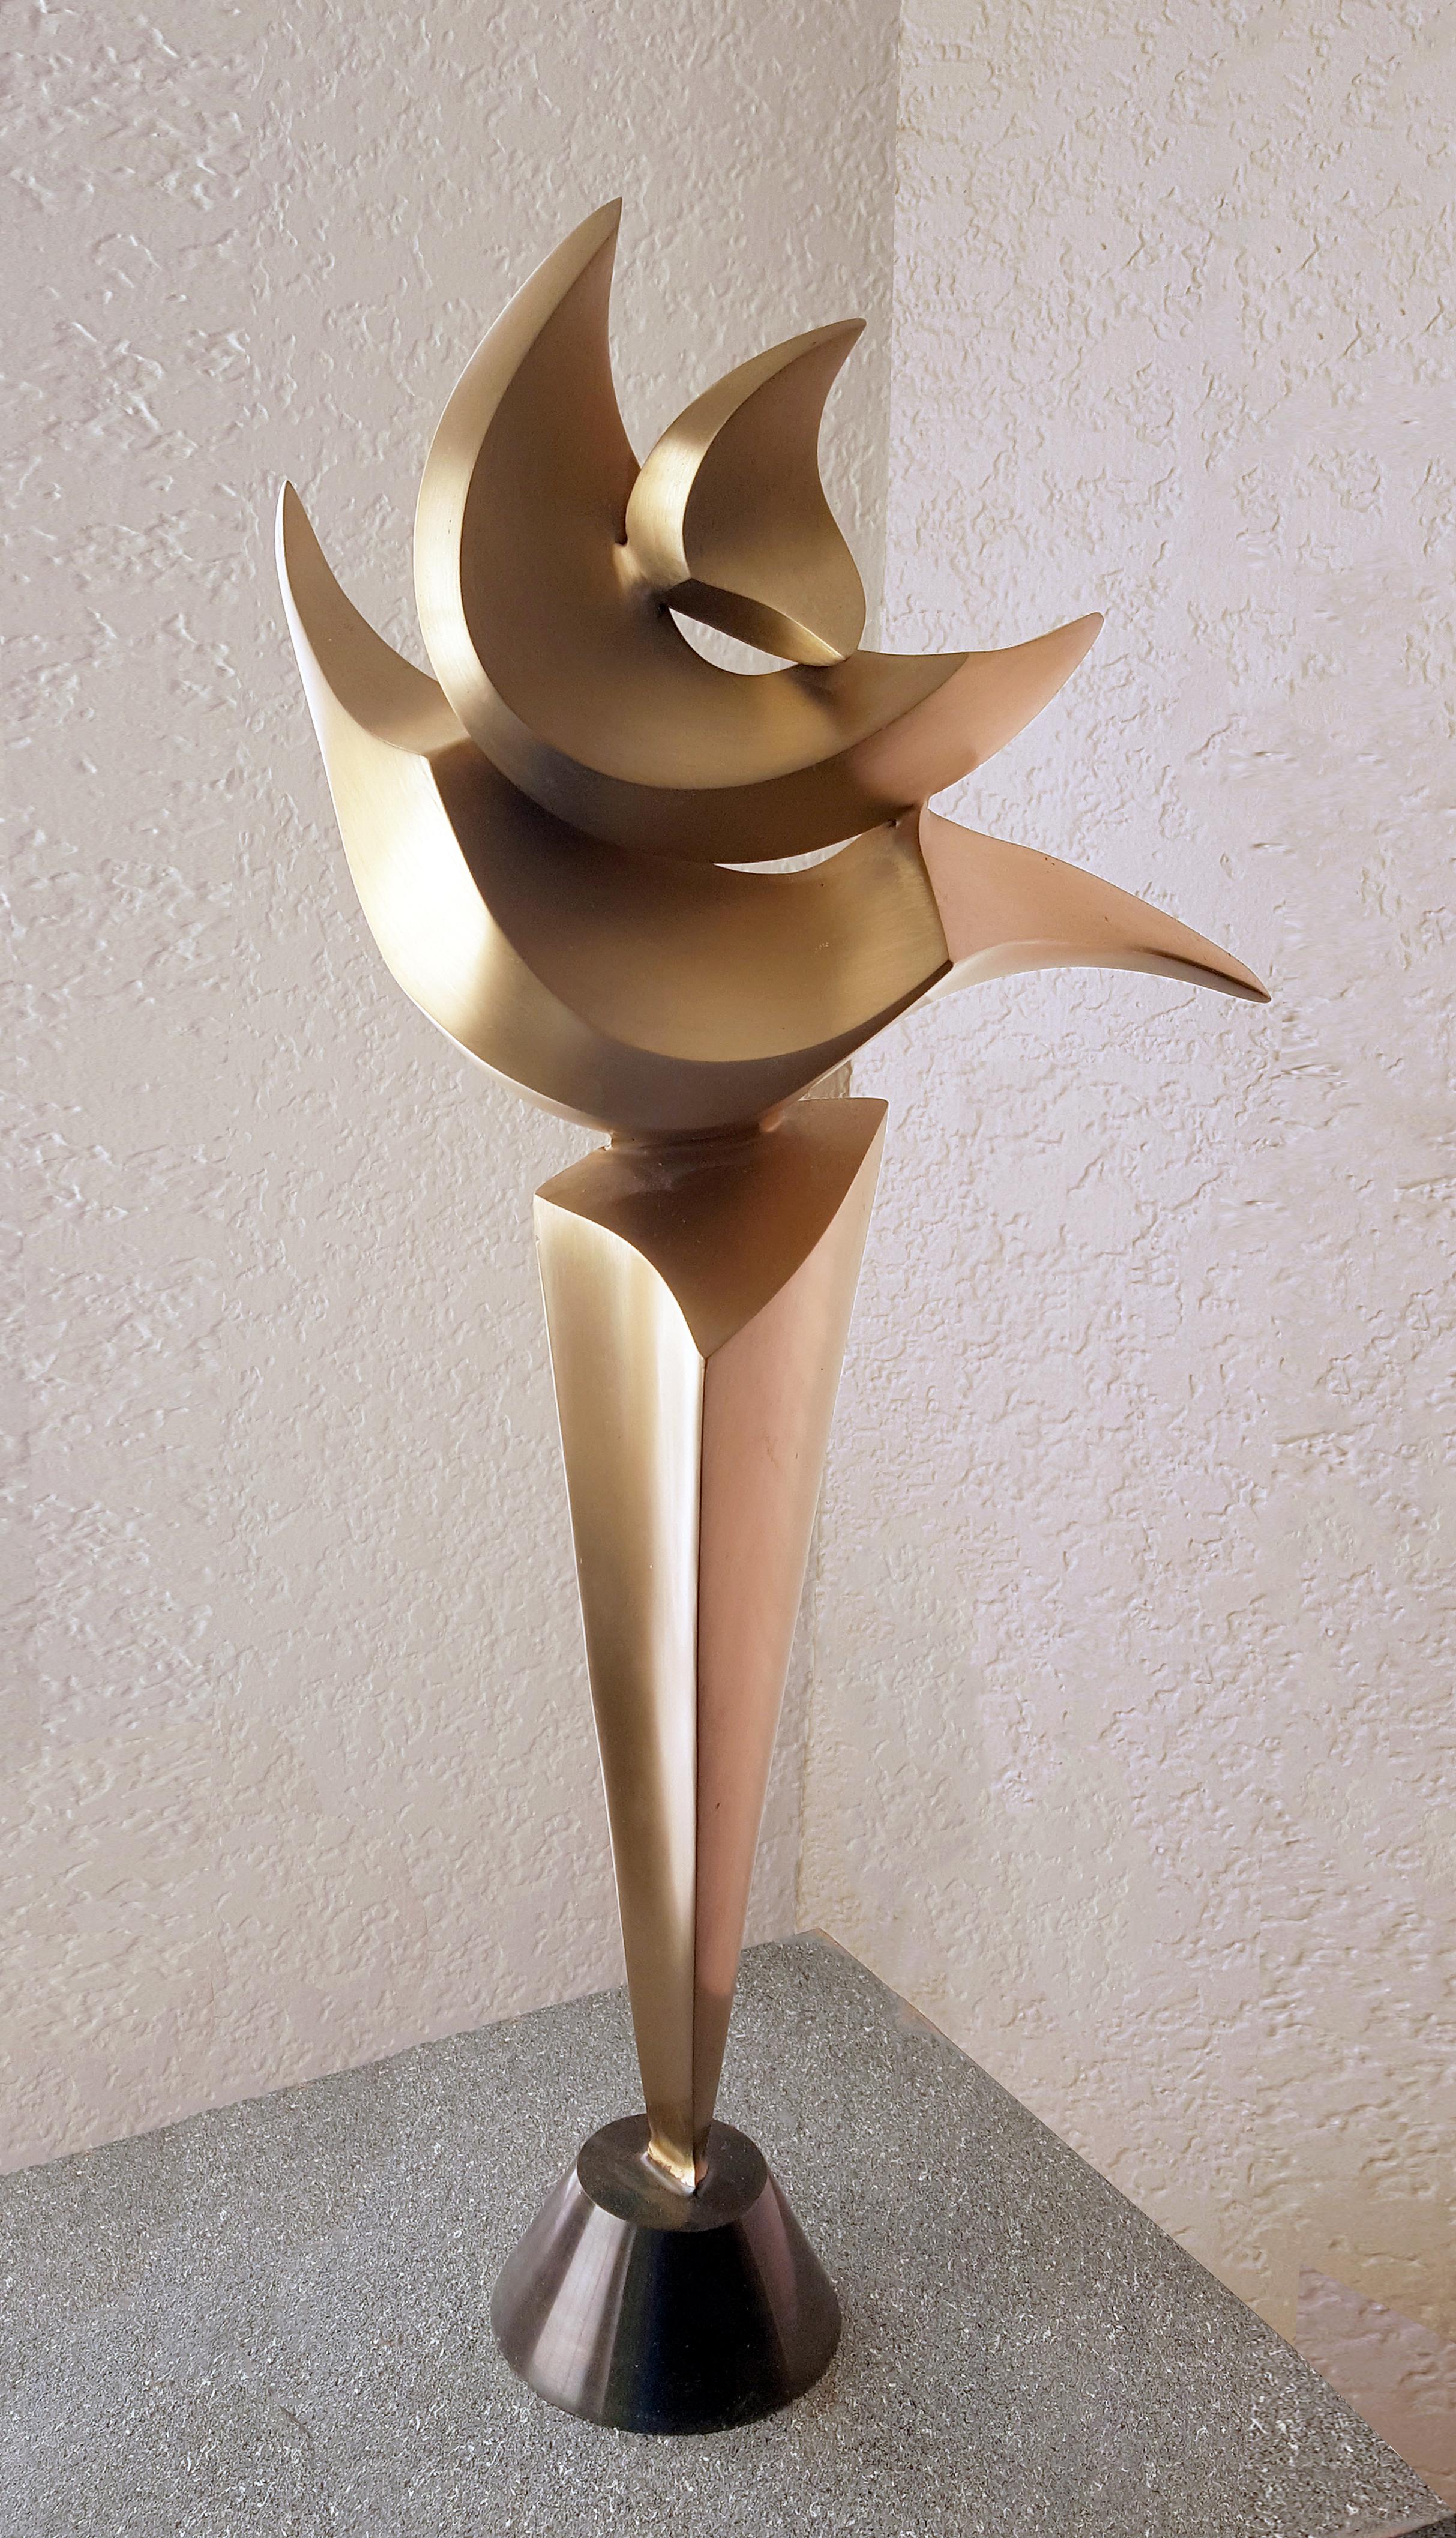 This piece of brushed bronze is an edition of 12.  The style I have in mind here could be described as organic abstraction.  Each of the individual sculptures is assembled in a slightly different arrangement so when ordering I can give you a choice